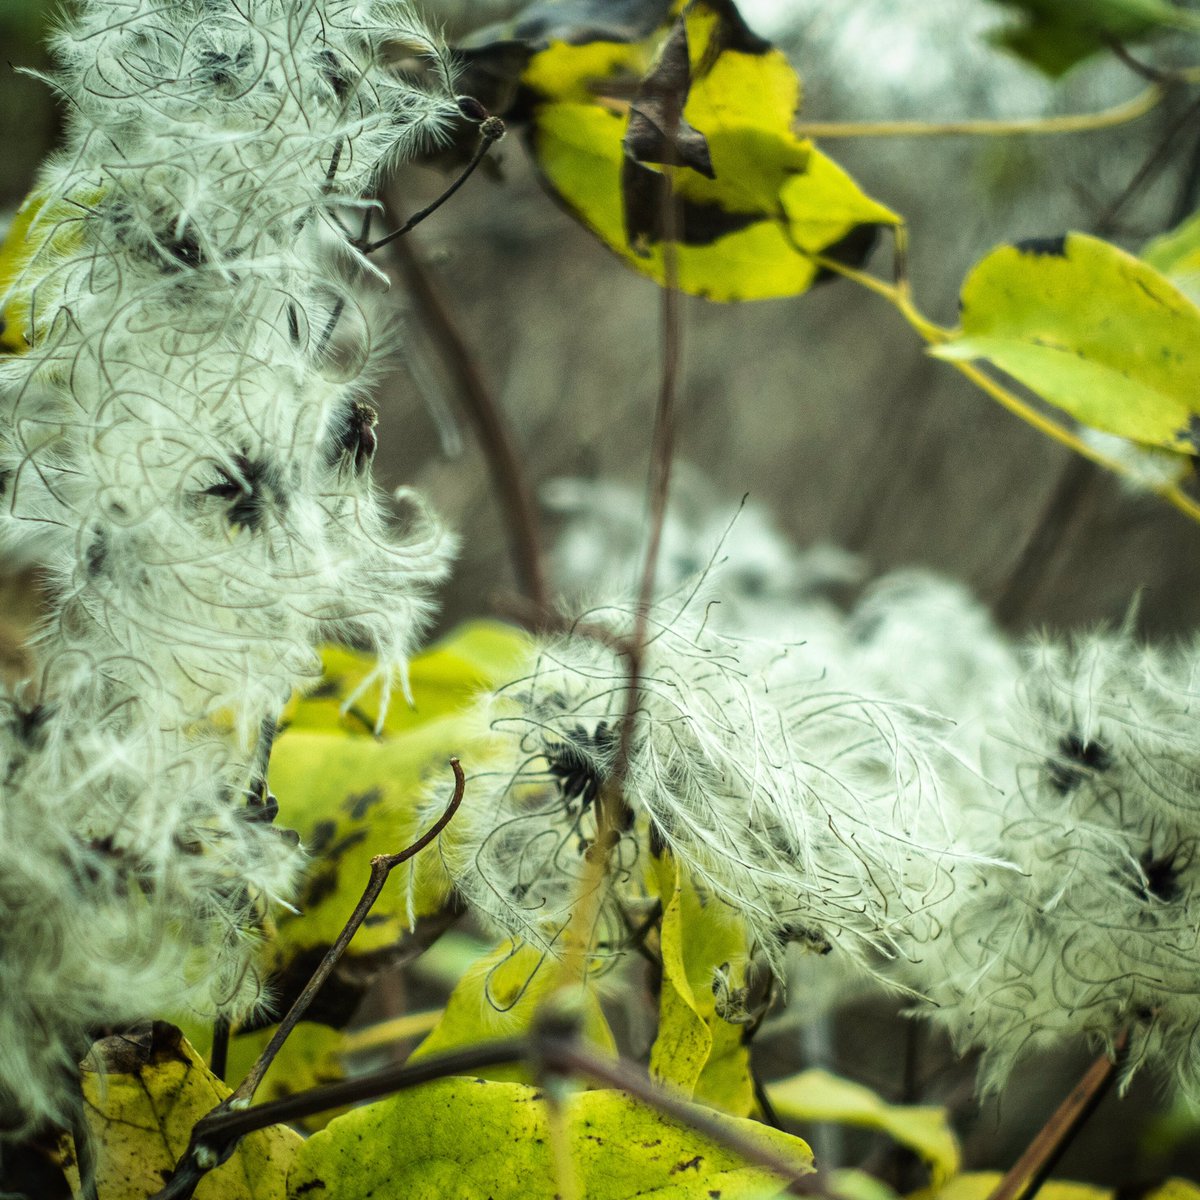 A change for me: the beauty is in the detail. #upclose #naturedetails #seedheads #plantlife #wildflowers #naturewalk #upclosewithnature #nature_brilliance #upclosephotography #naturephotography #kentnature #plant
#oldmansbeard #nature #lichen #naturelover #countrywalk #dartford